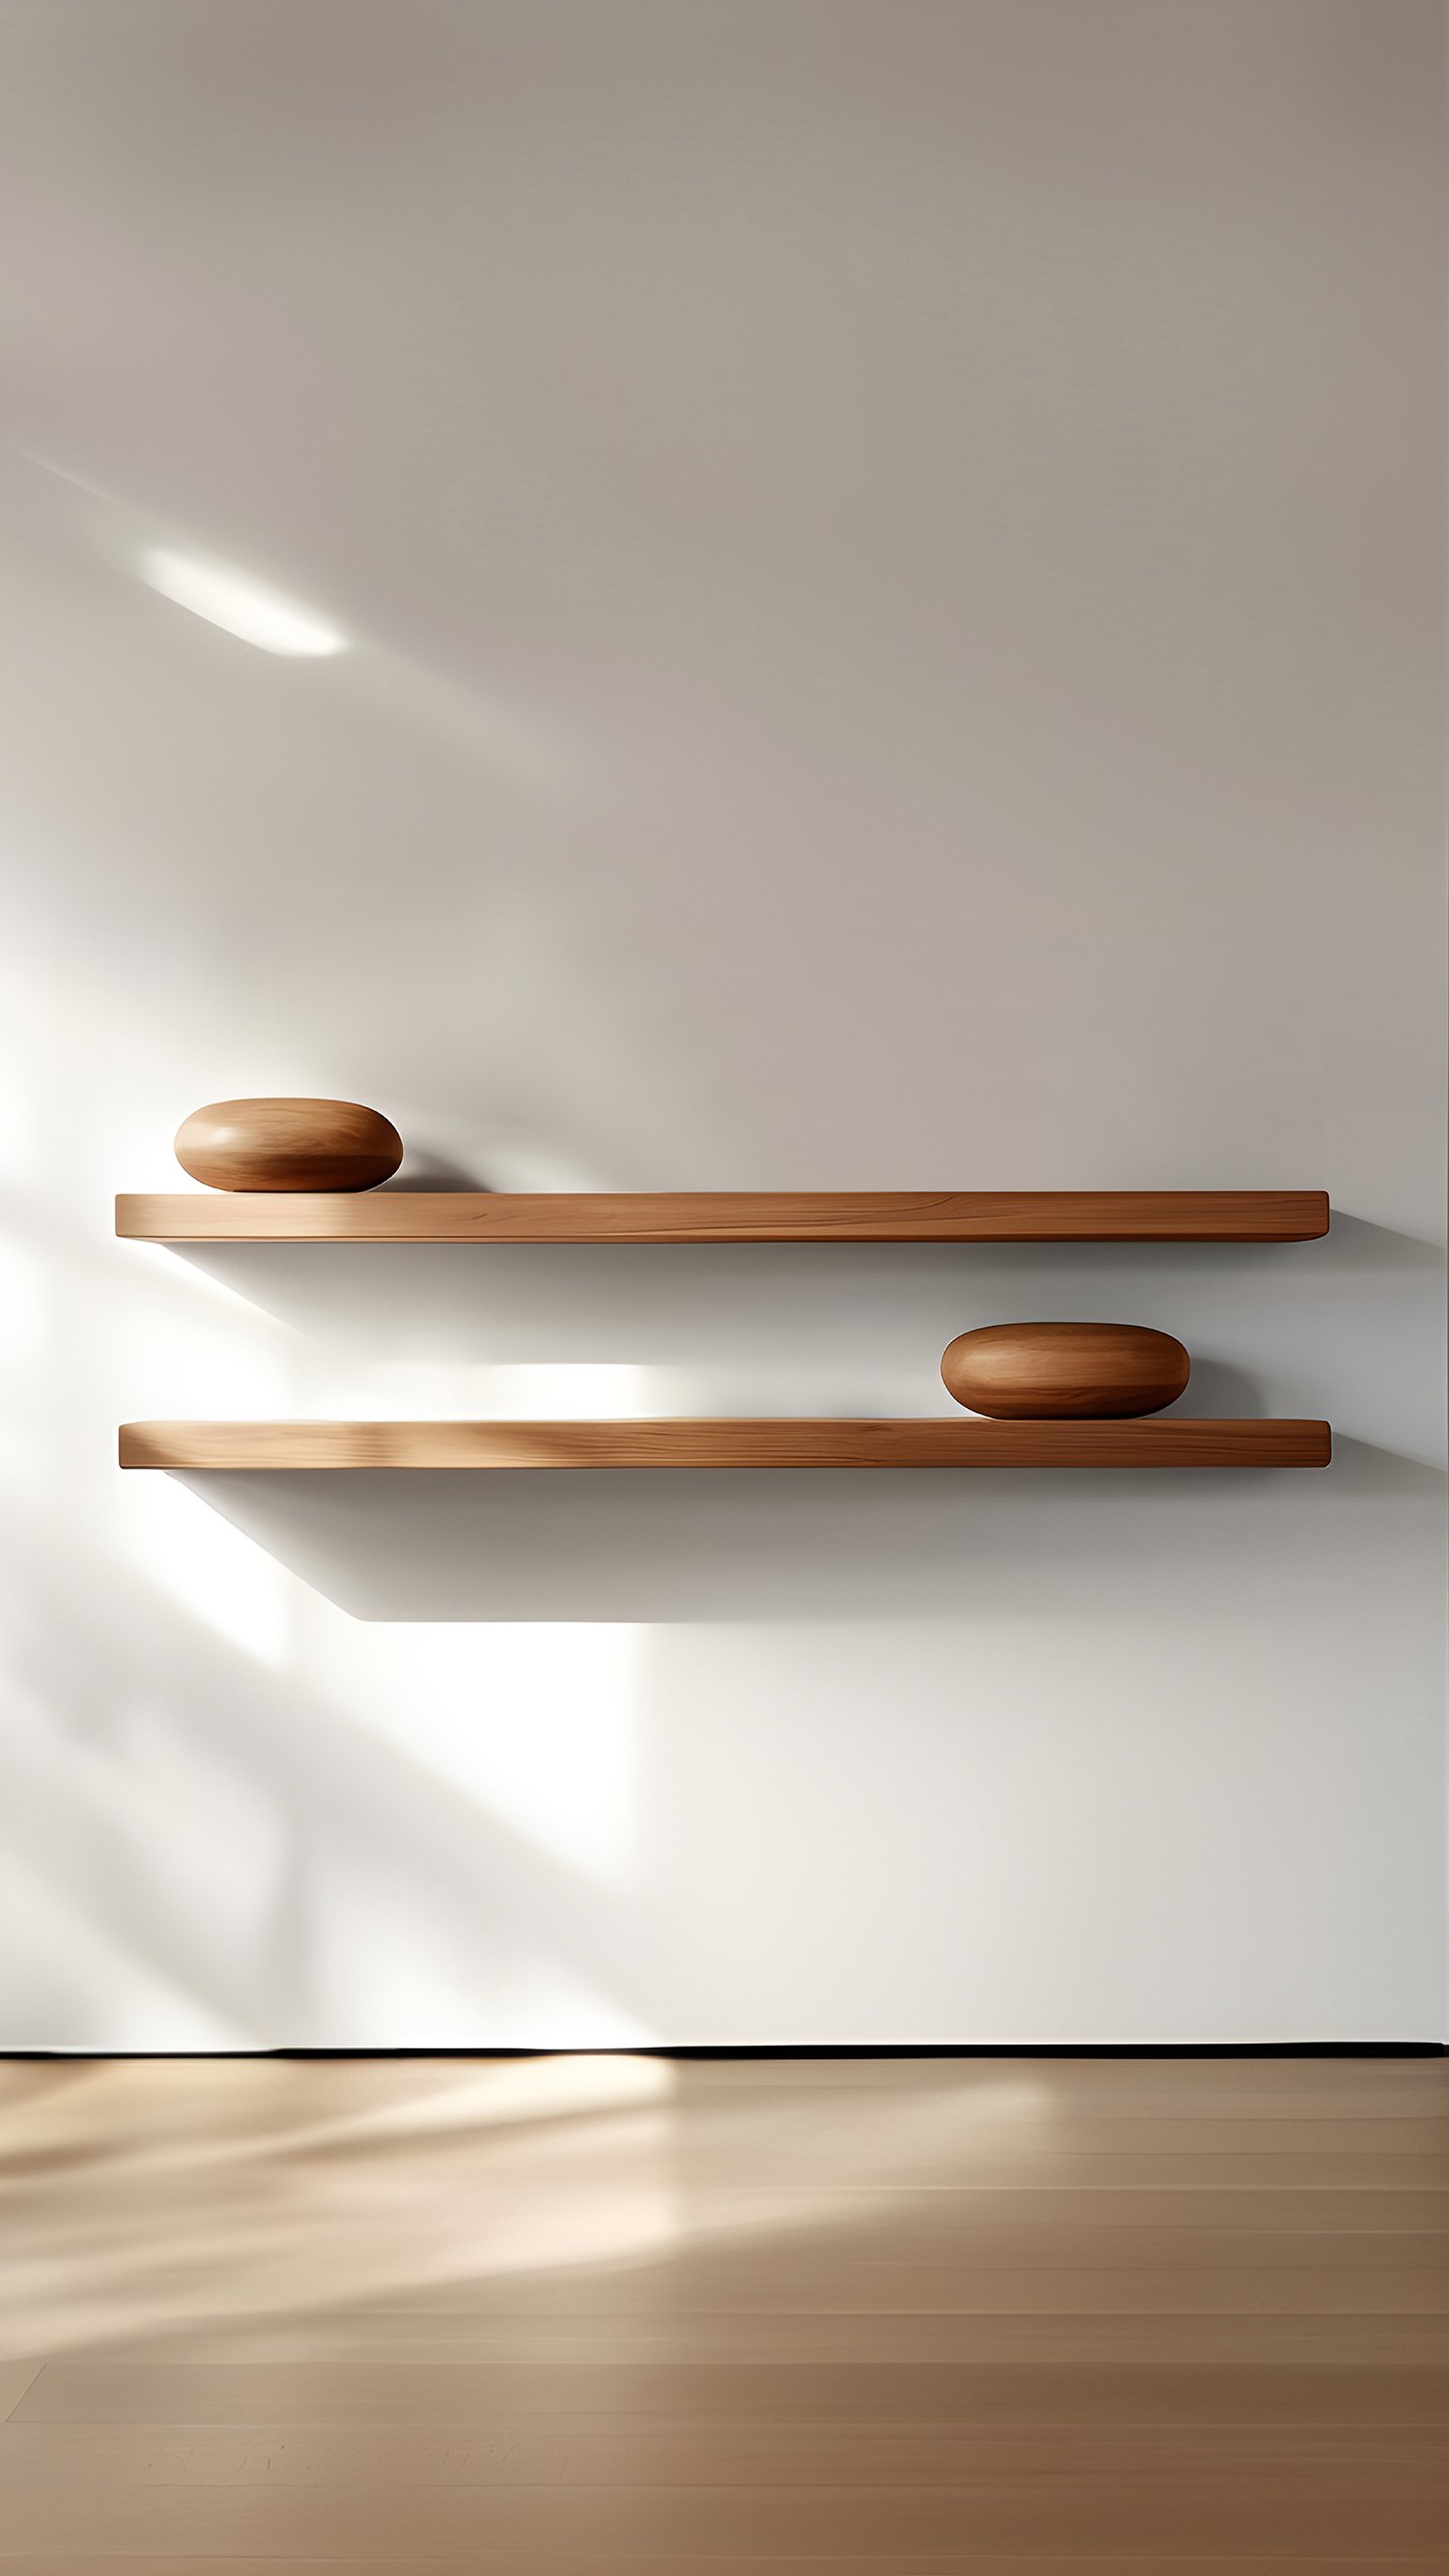 Individual Floating Shelf with One Sculptural Wooden Pebble Accent, Sereno by Joel Escalona — 7.jpg